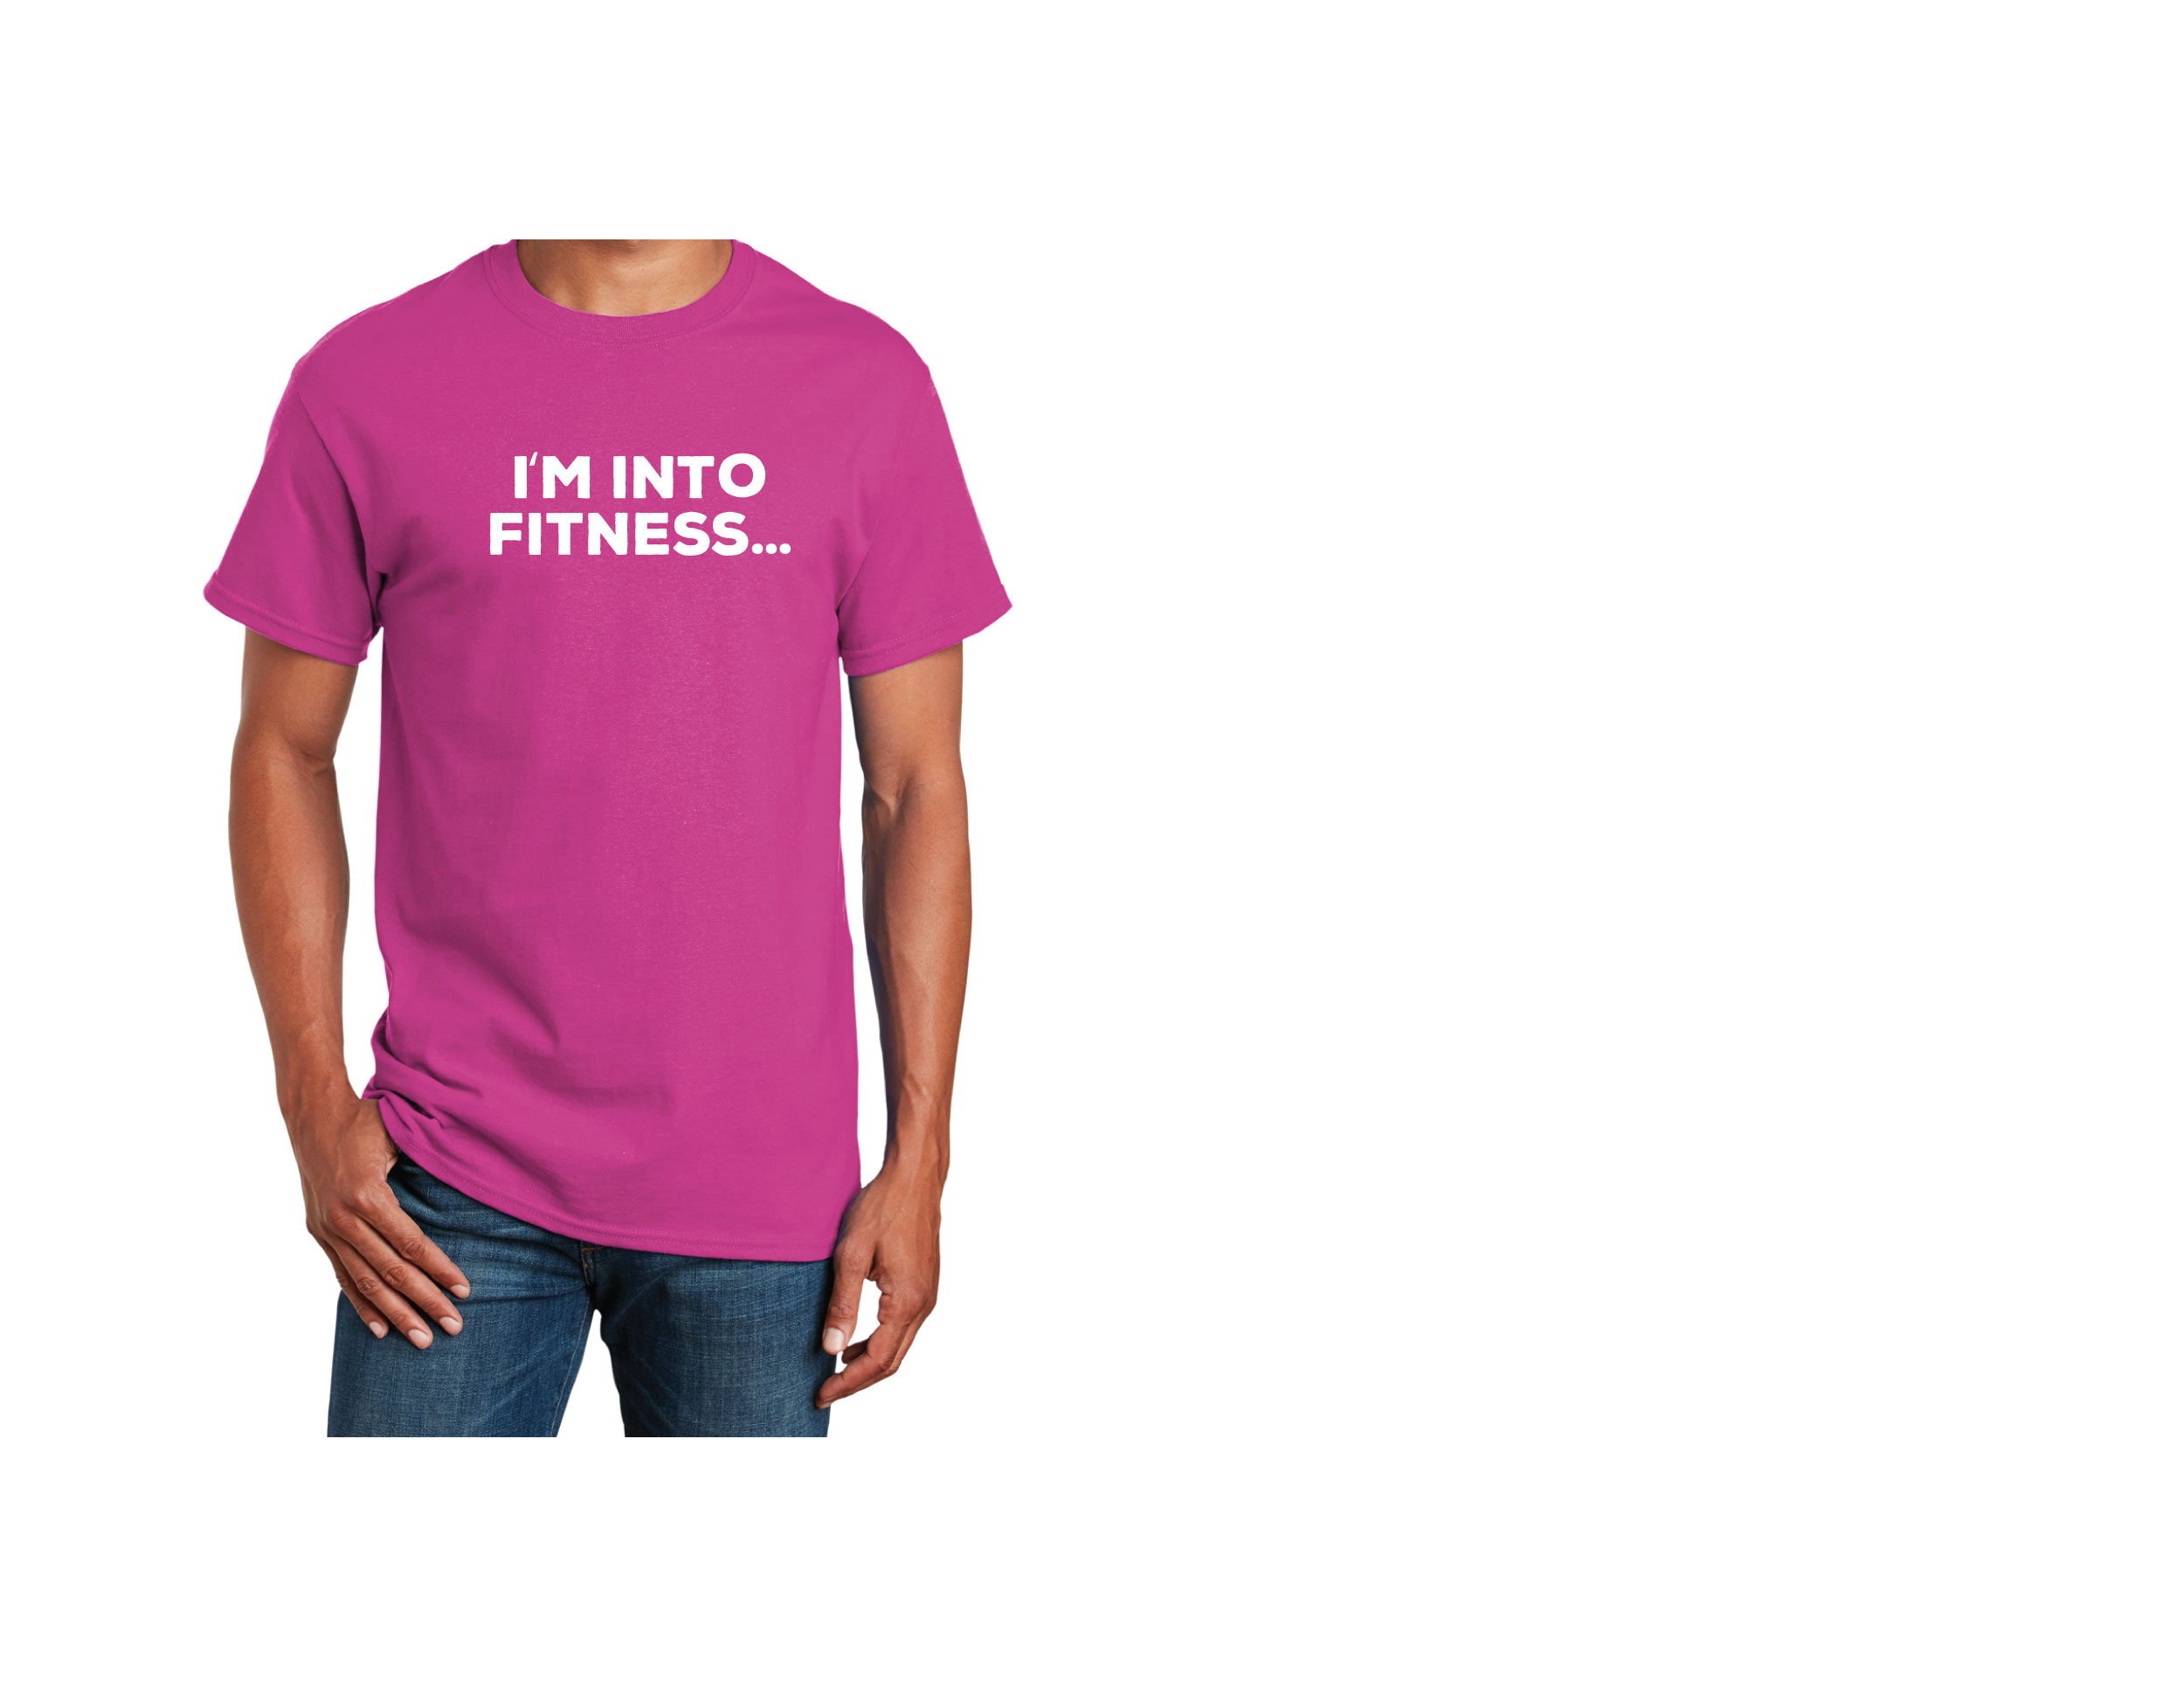 I'm Into Fitness T-Shirt Front Pink Color